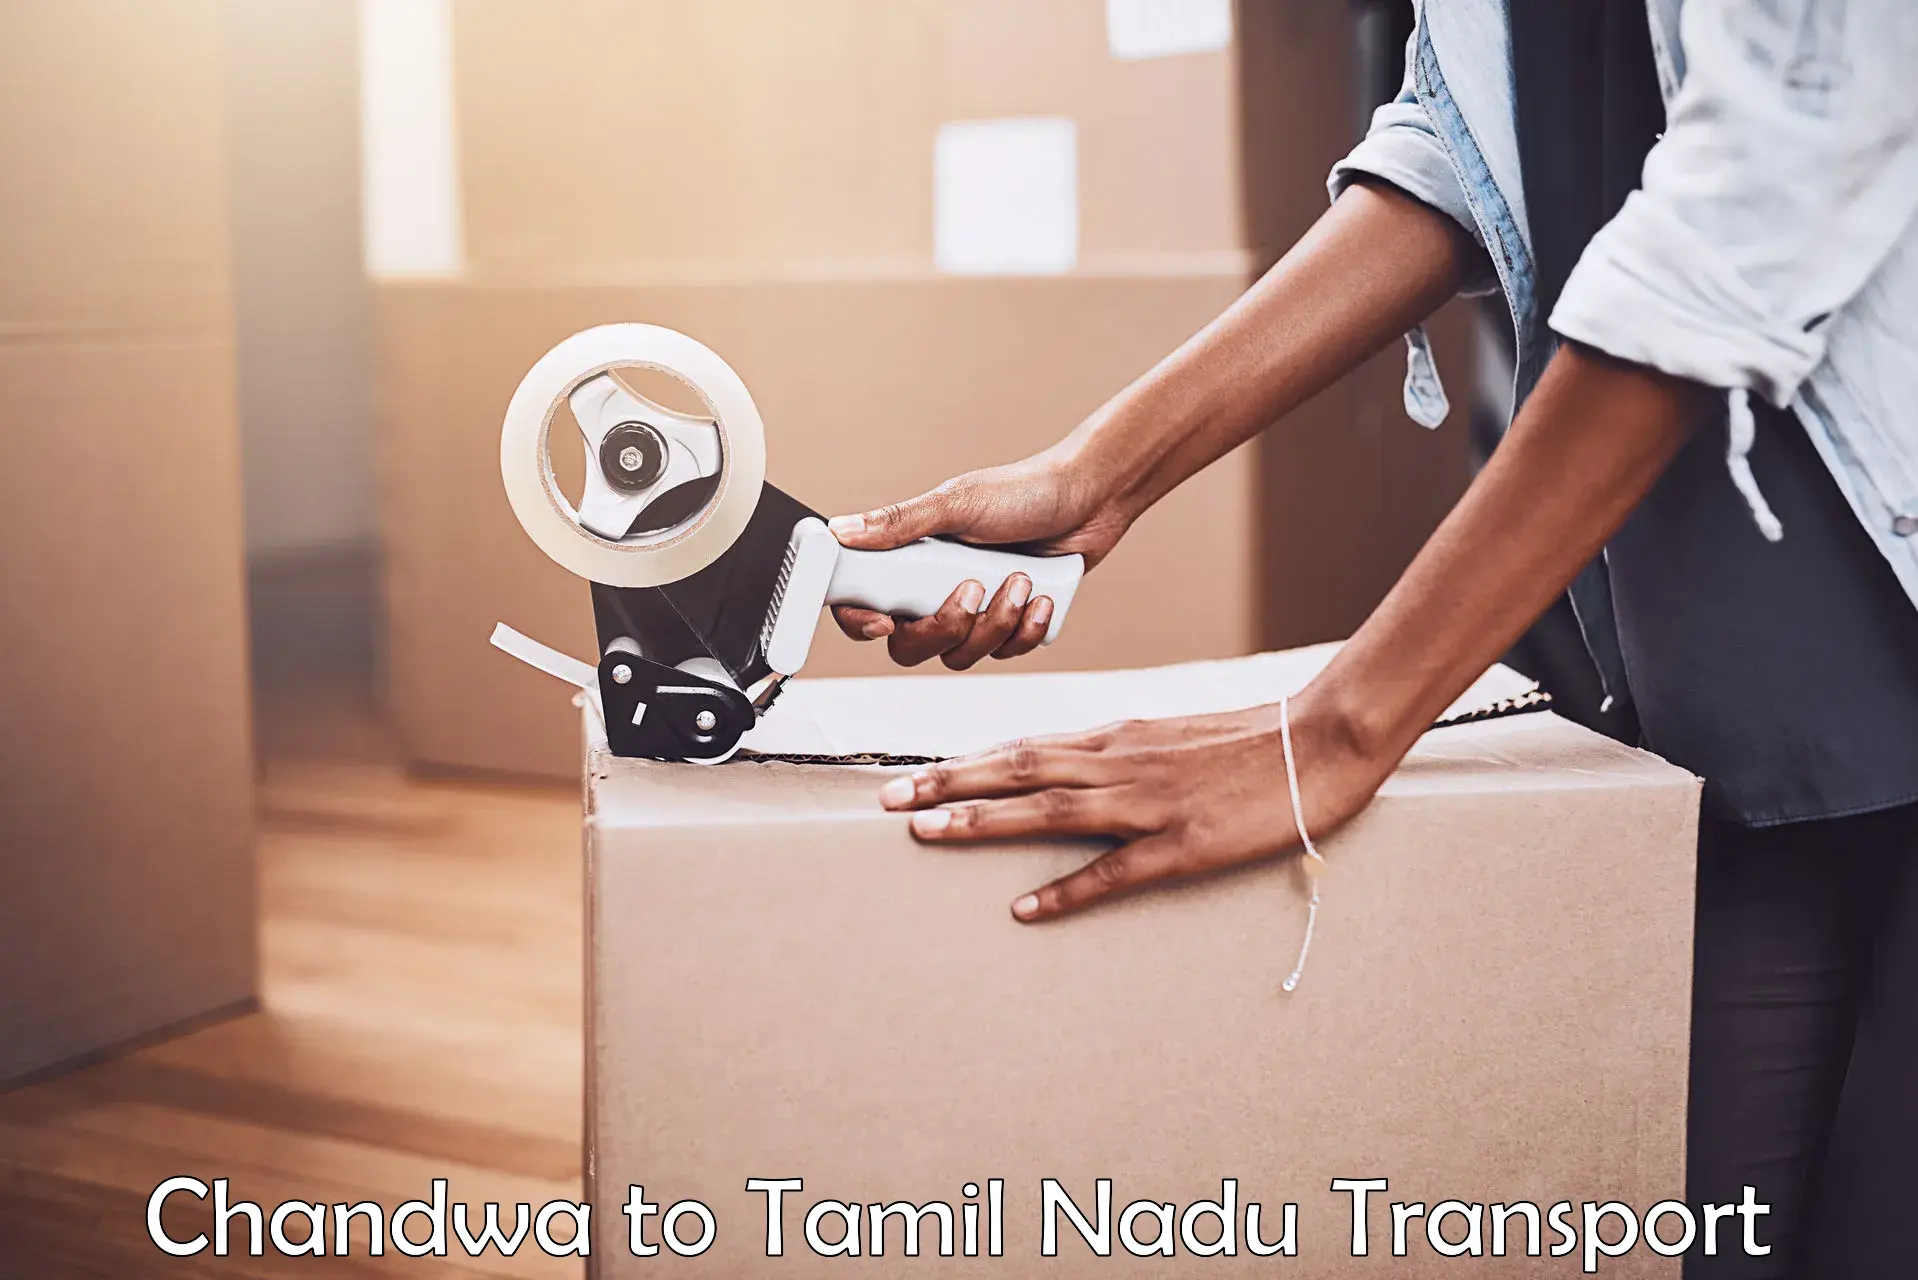 Pick up transport service Chandwa to Vellore Institute of Technology